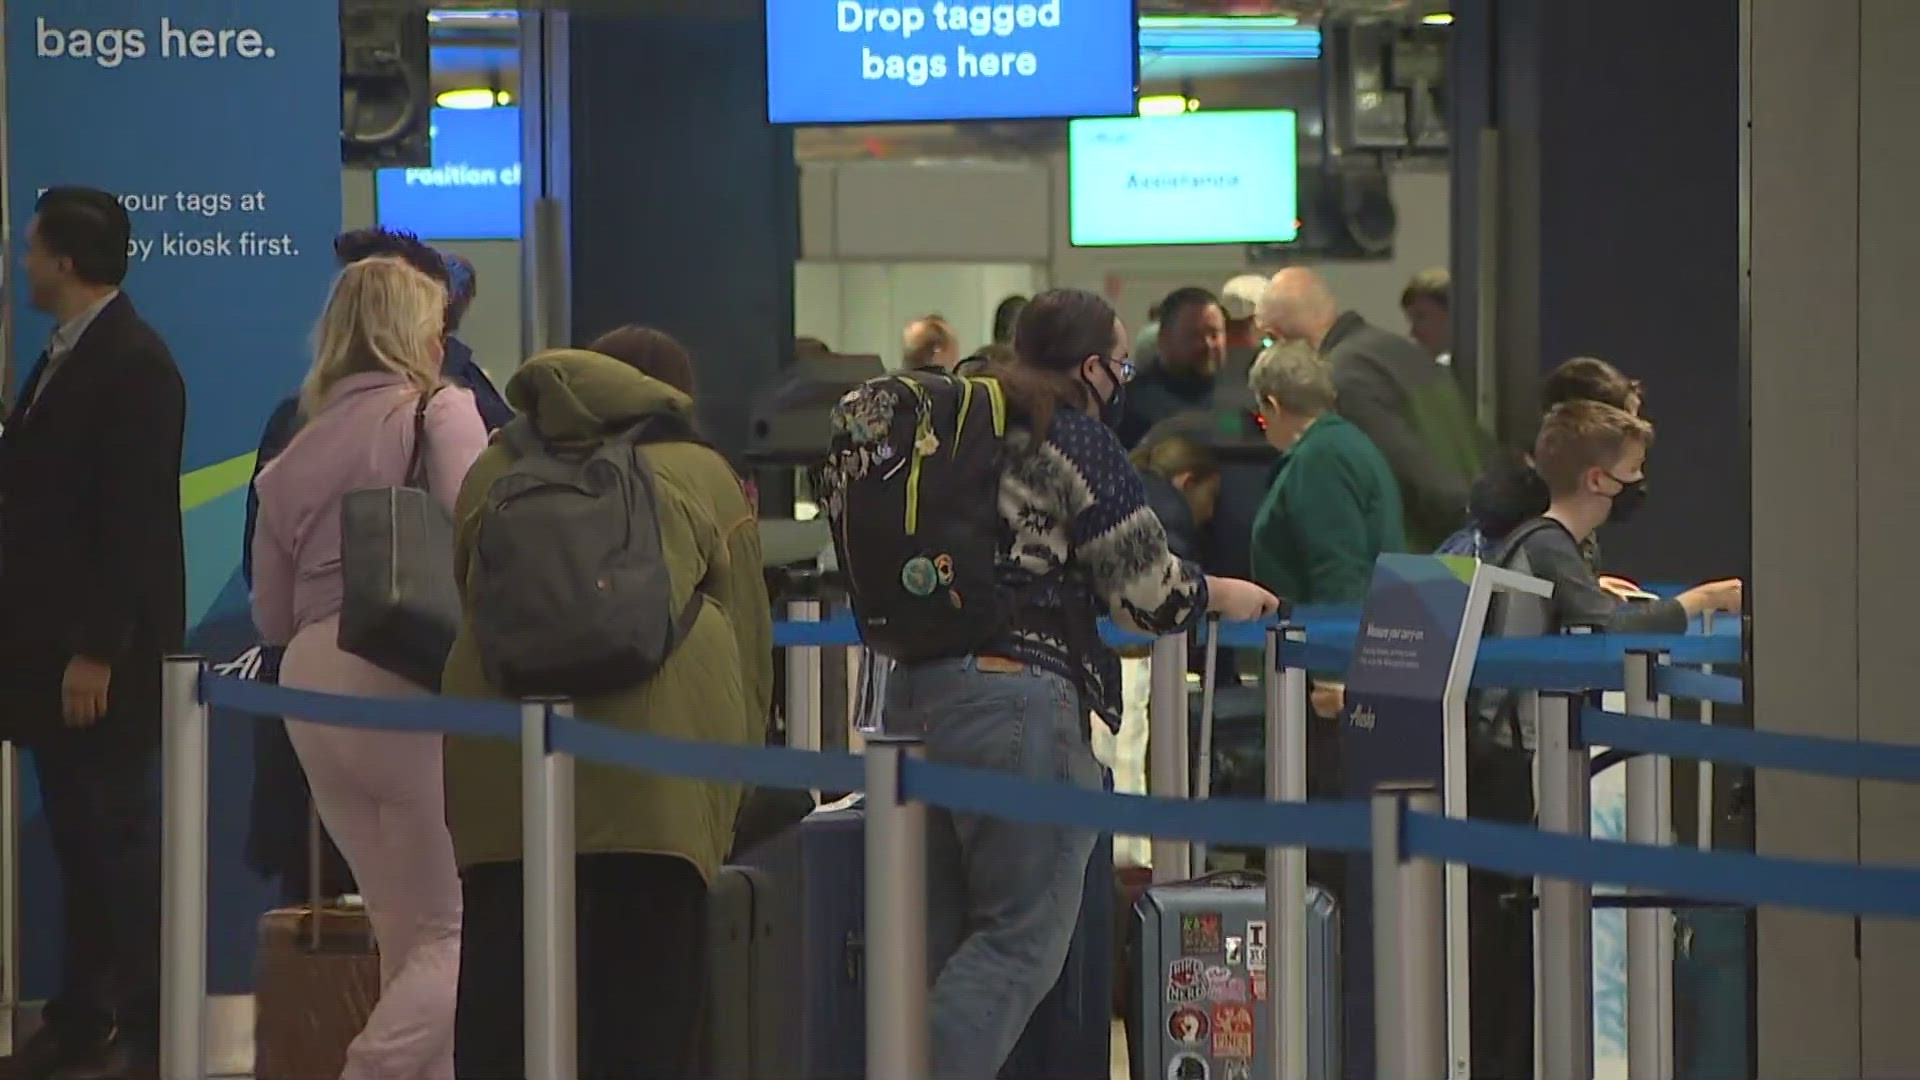 Hundreds of thousands of travelers are expected to pass through Sea-Tac Airport as spring break begins